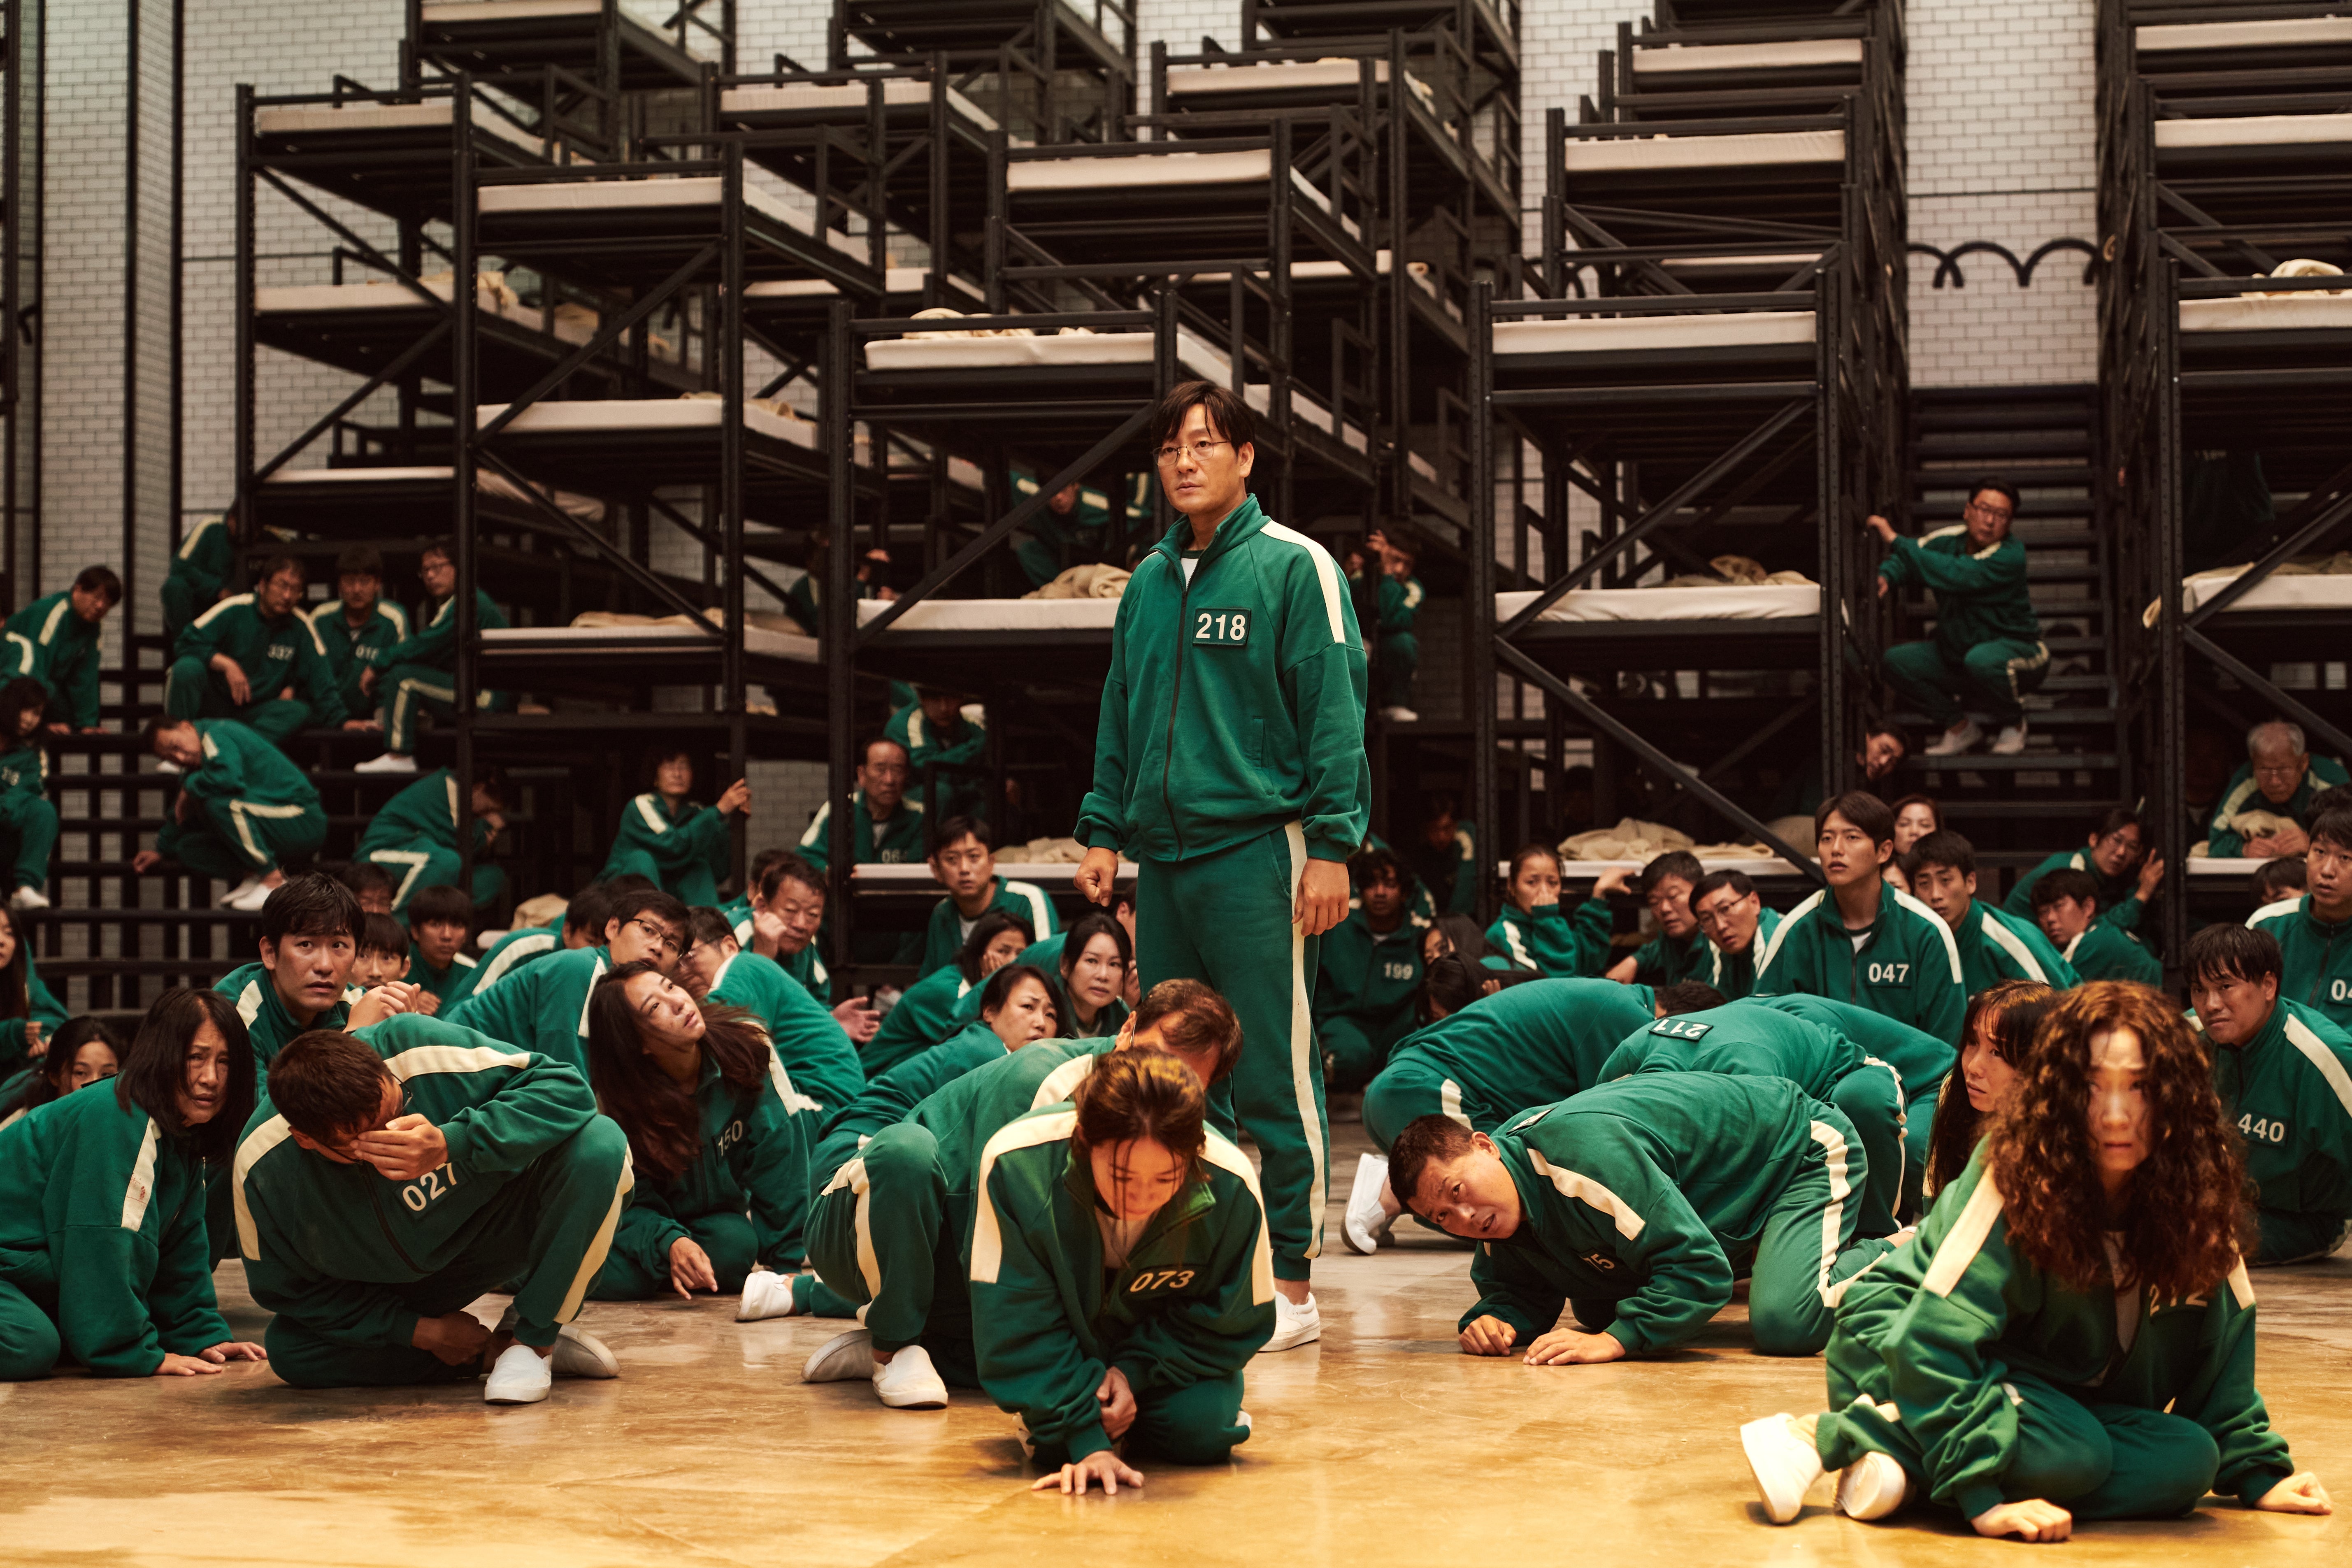 In a bunk bed-filled room, people wearing green and white jumpsuits crouch and sit on the floor. One man with the number 218 on his uniform stands upright.